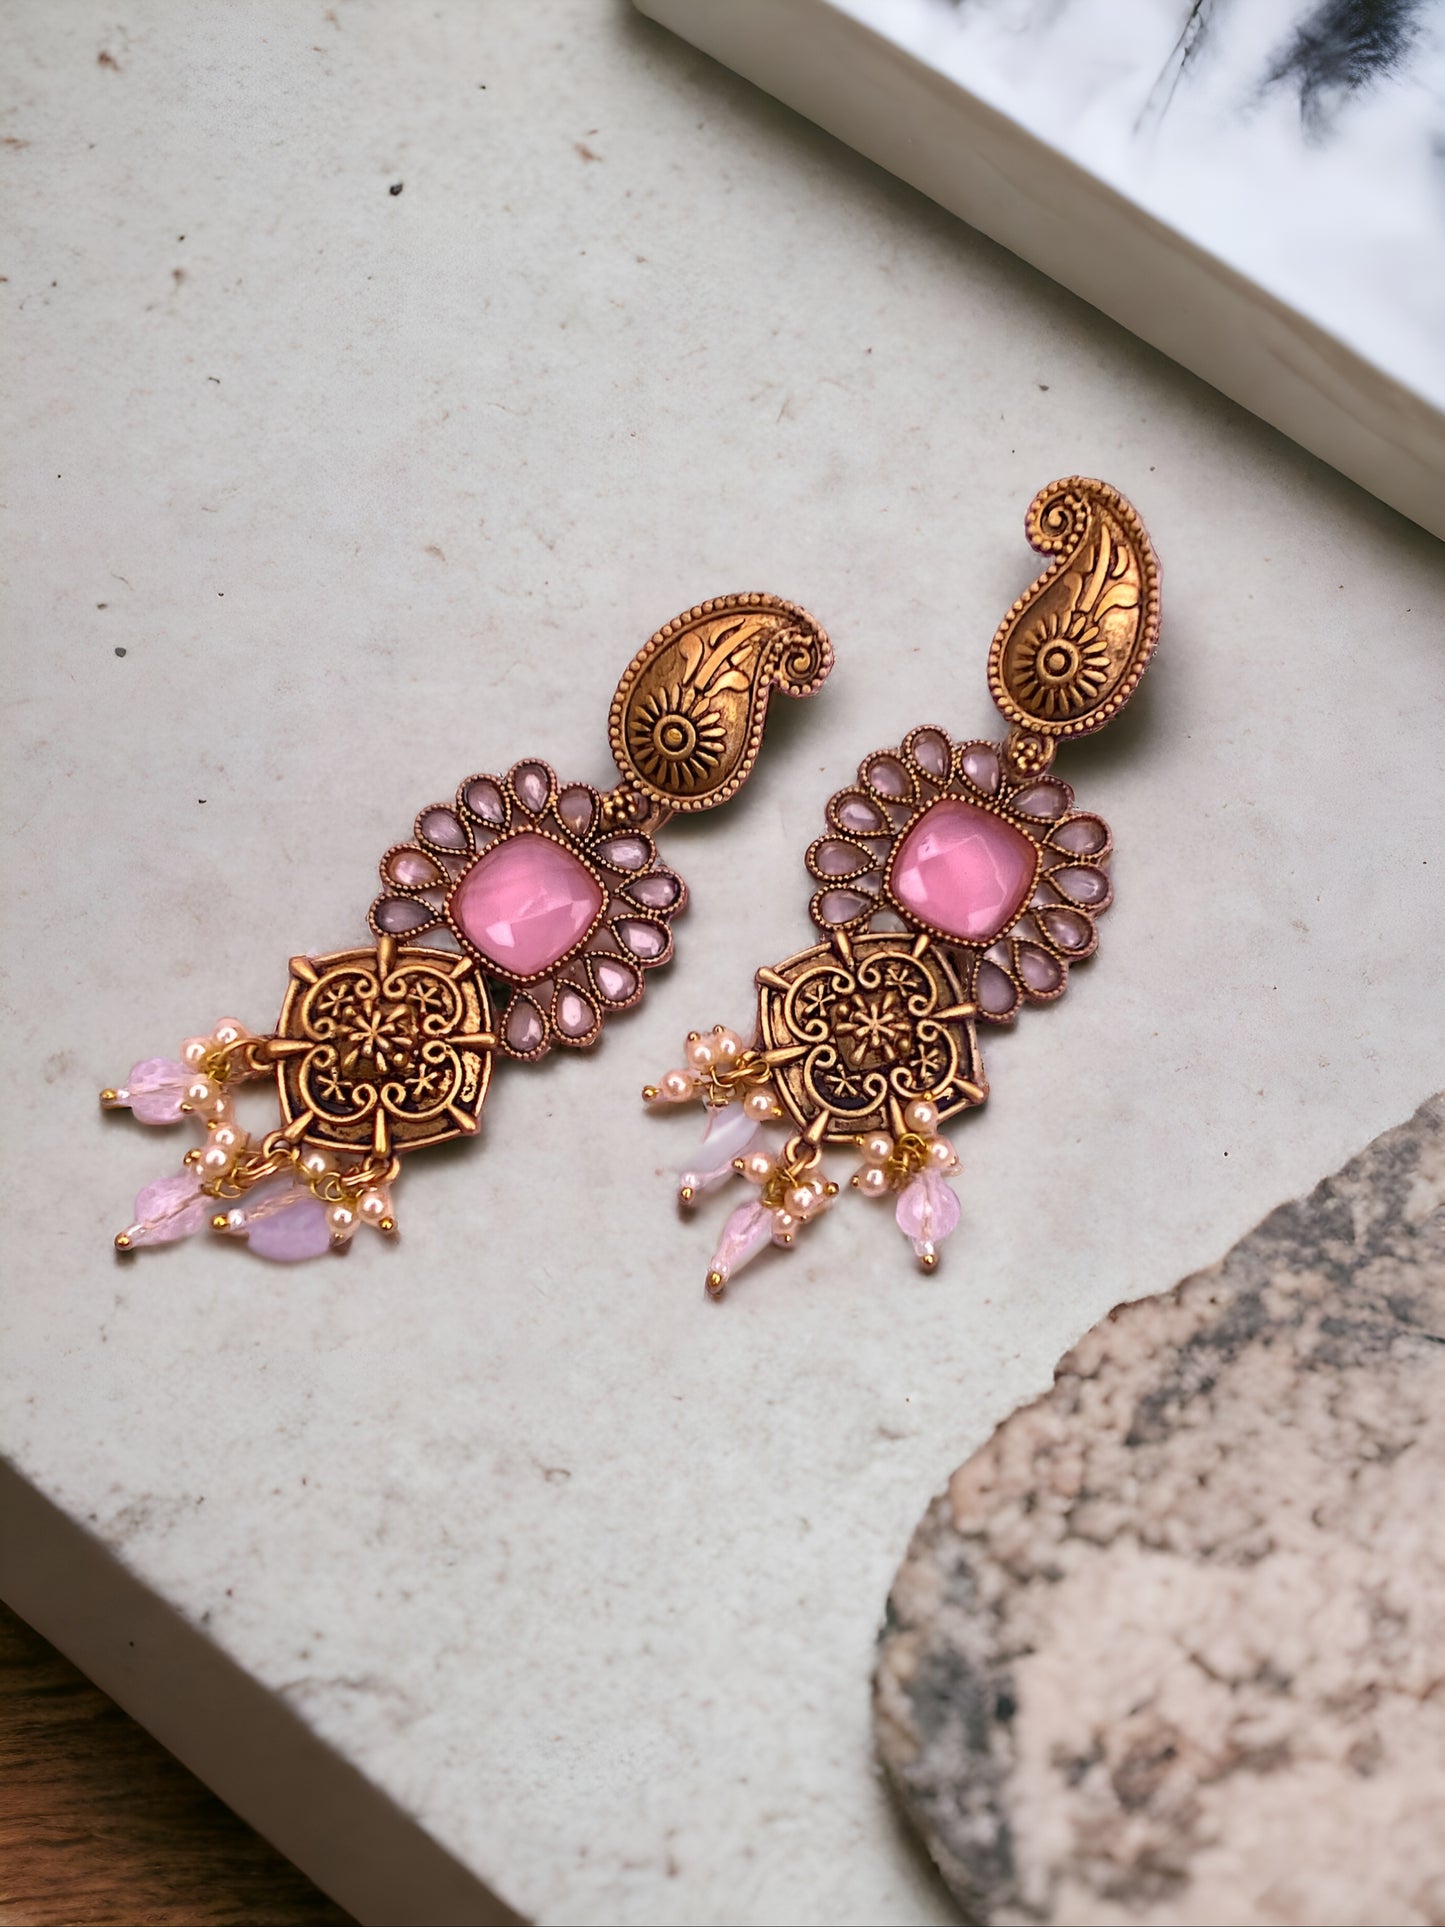 Gold-Toned Traditional Earrings